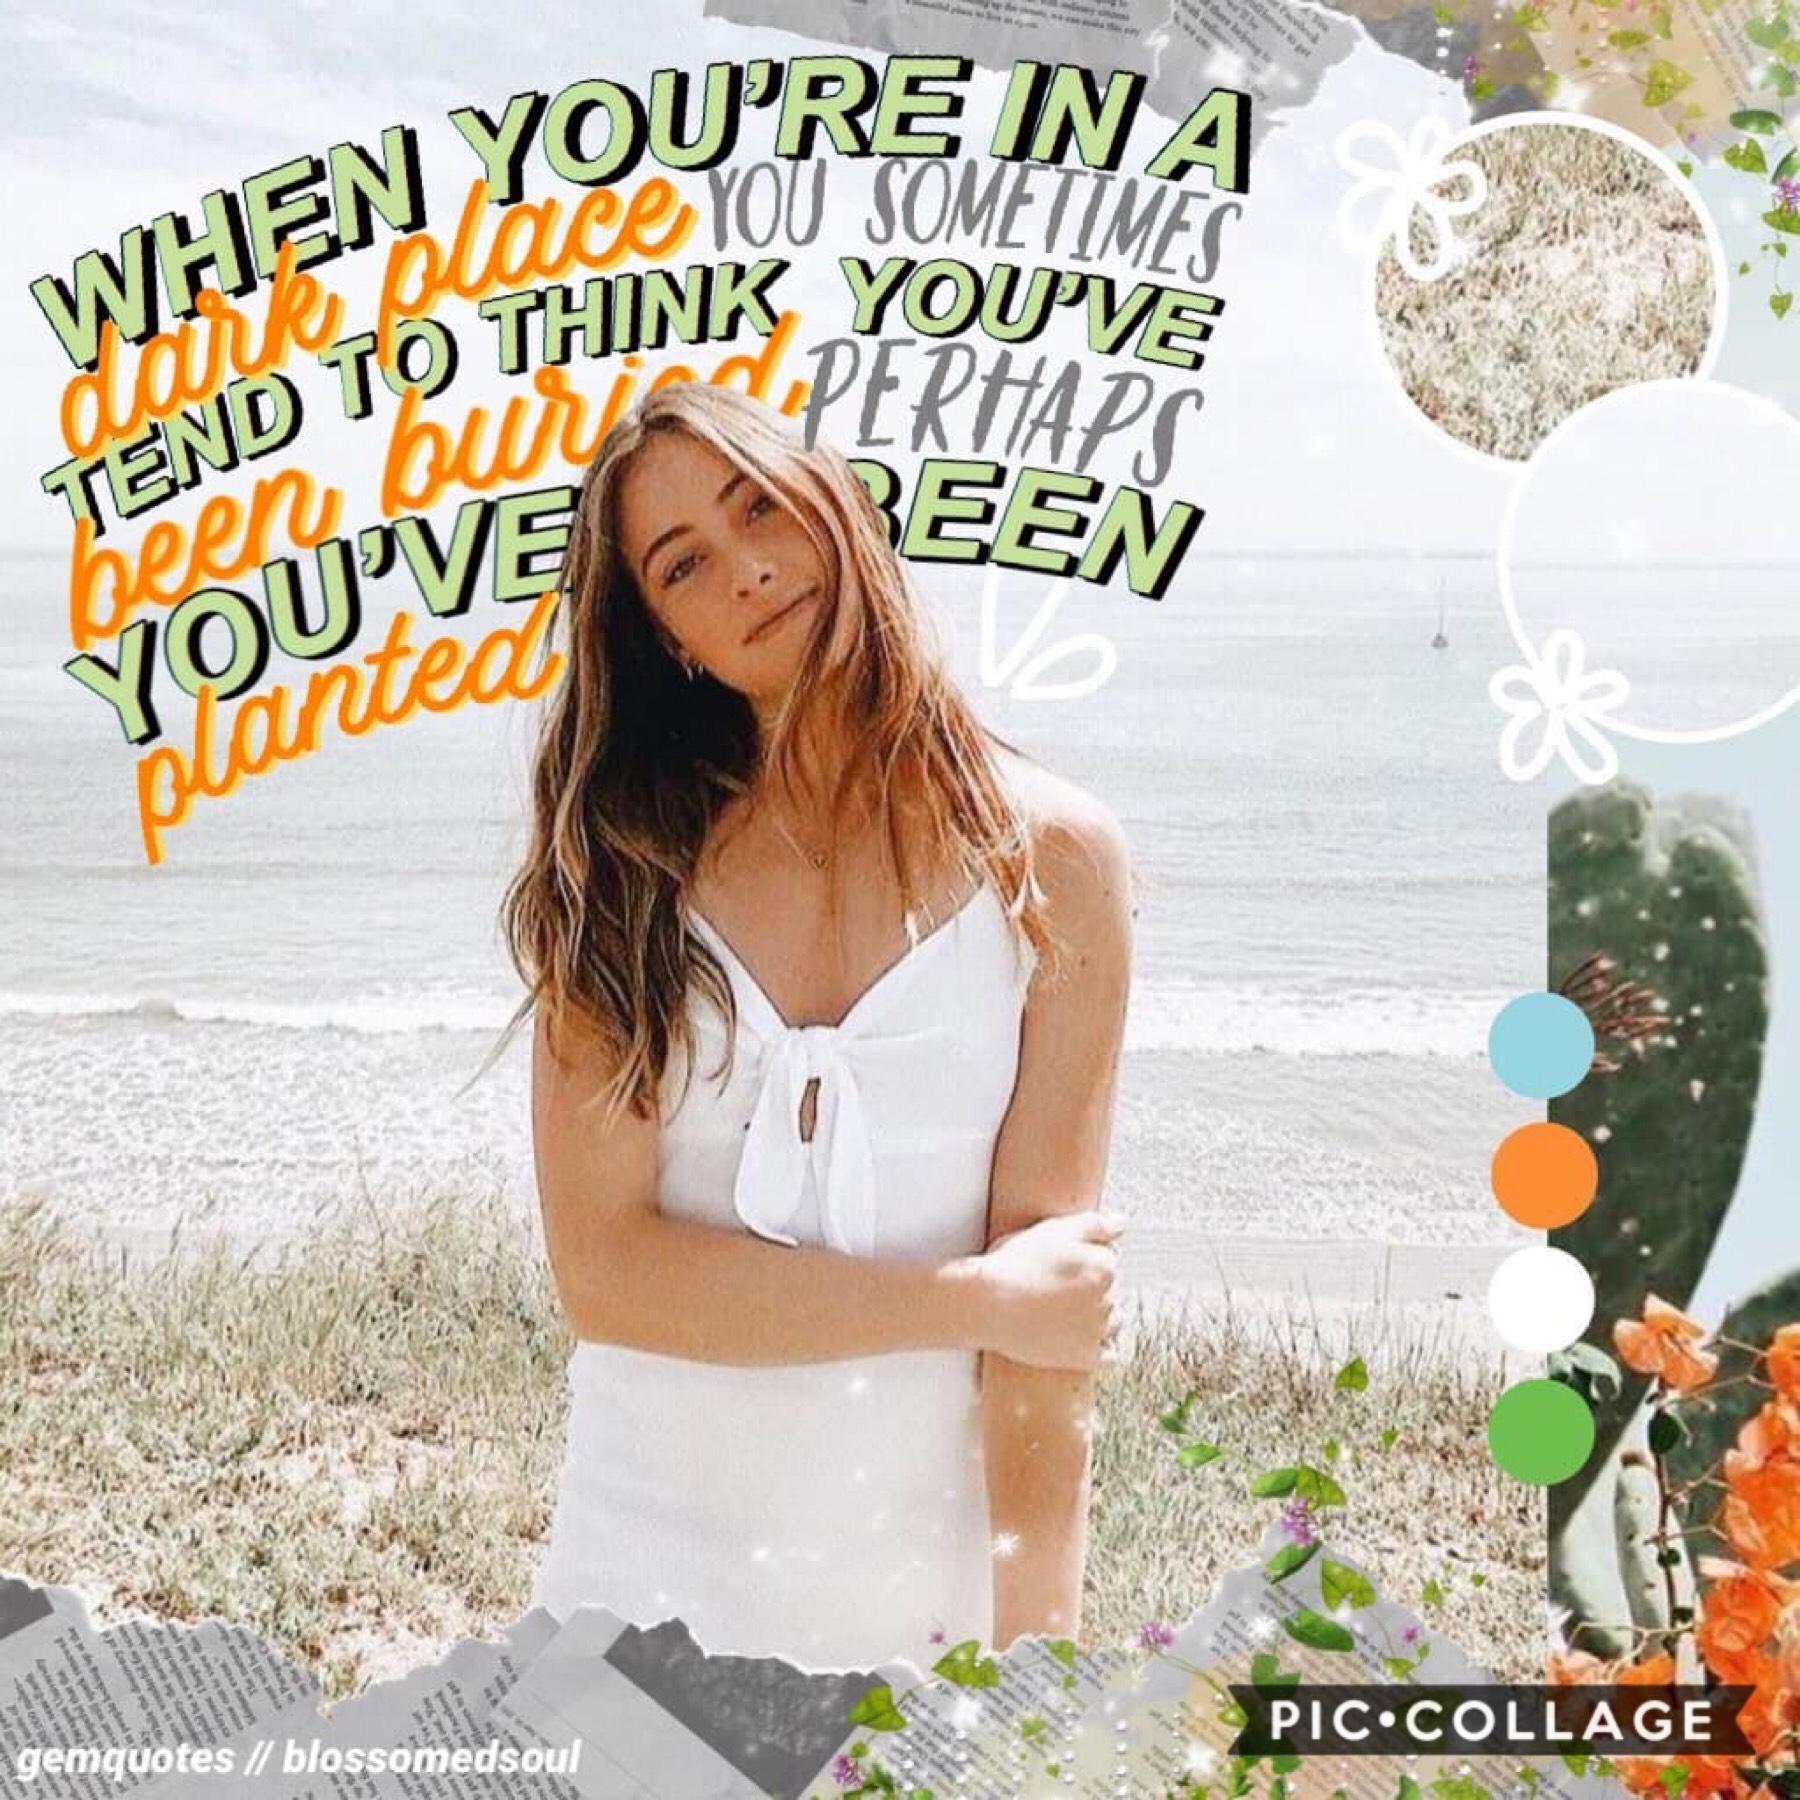 [ t a p ]

collab with the amazing @gemquotes! she did the stunning text and i did the bg :) definitely go check out her account, she’s so talented 💓💓 qotd: fav emoji? aotd: 🦋